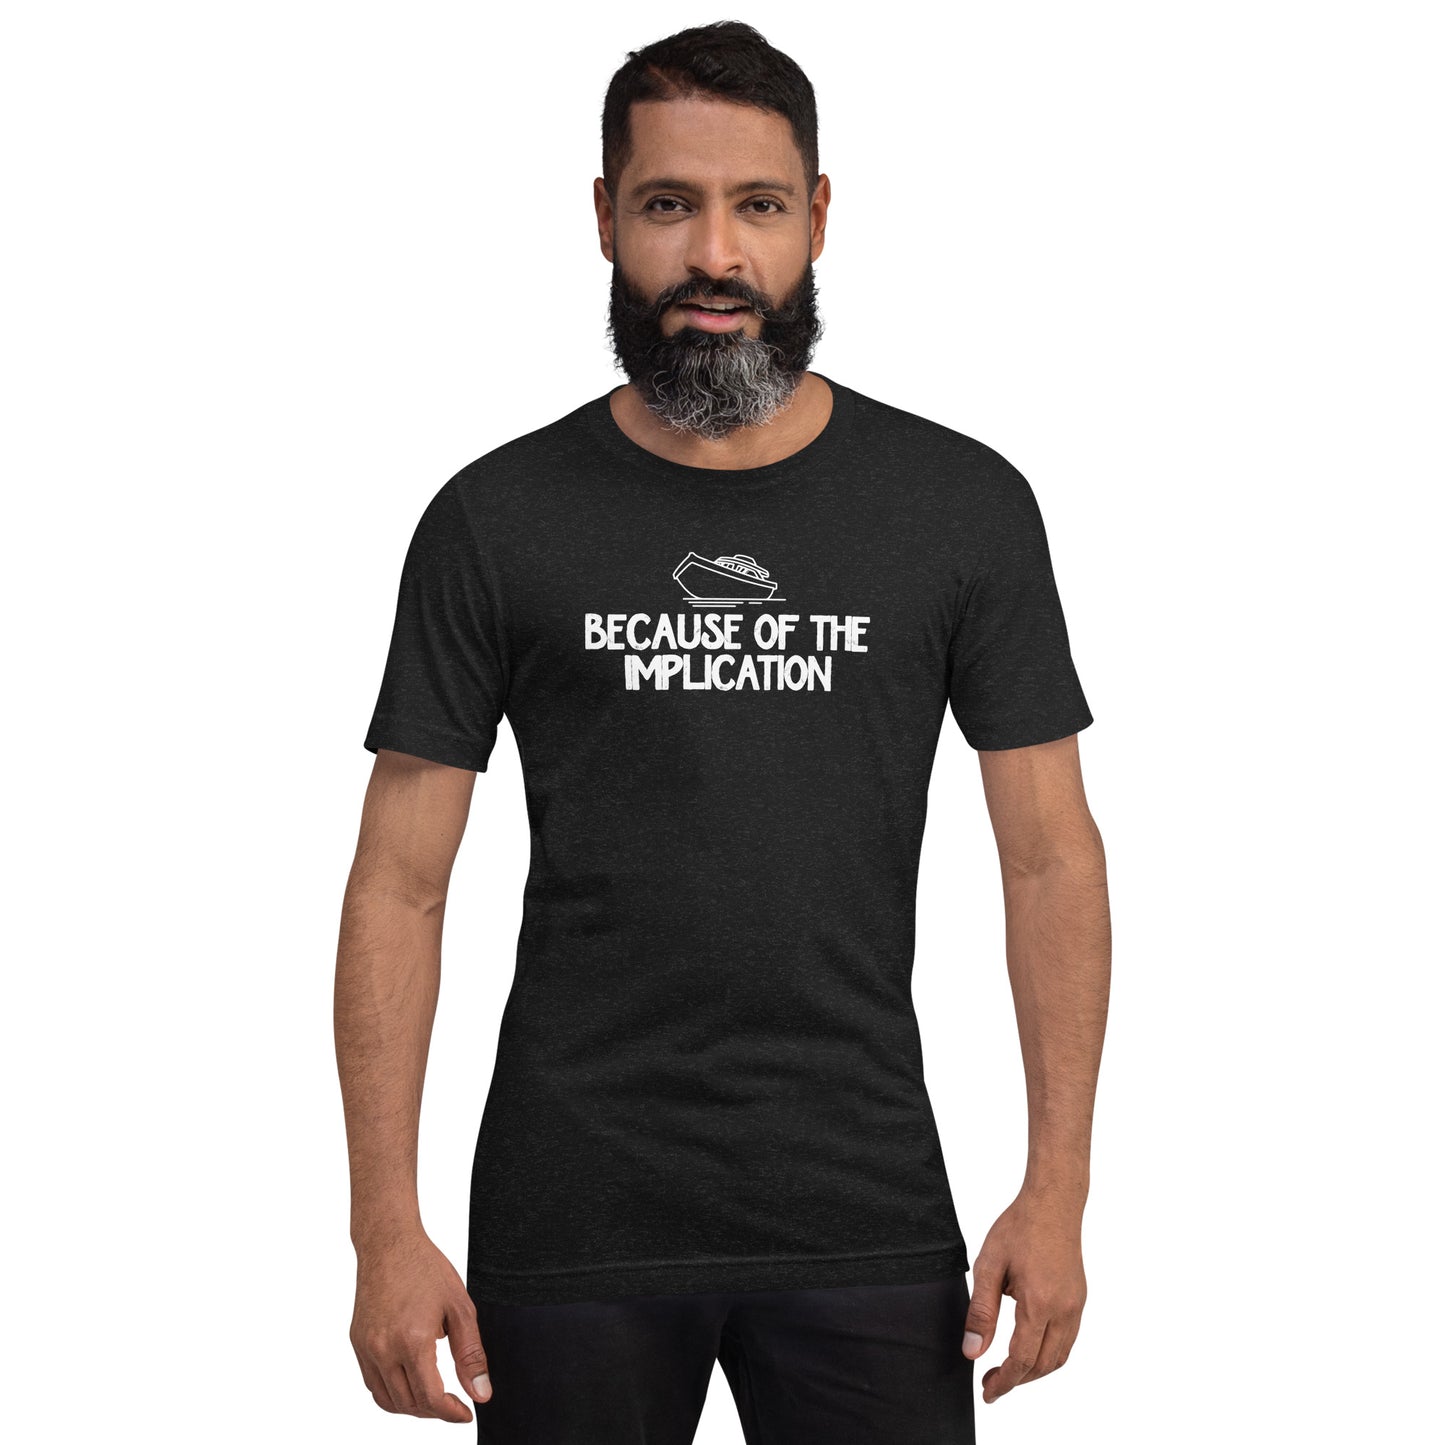 Because of the Implication - Unisex t-shirt